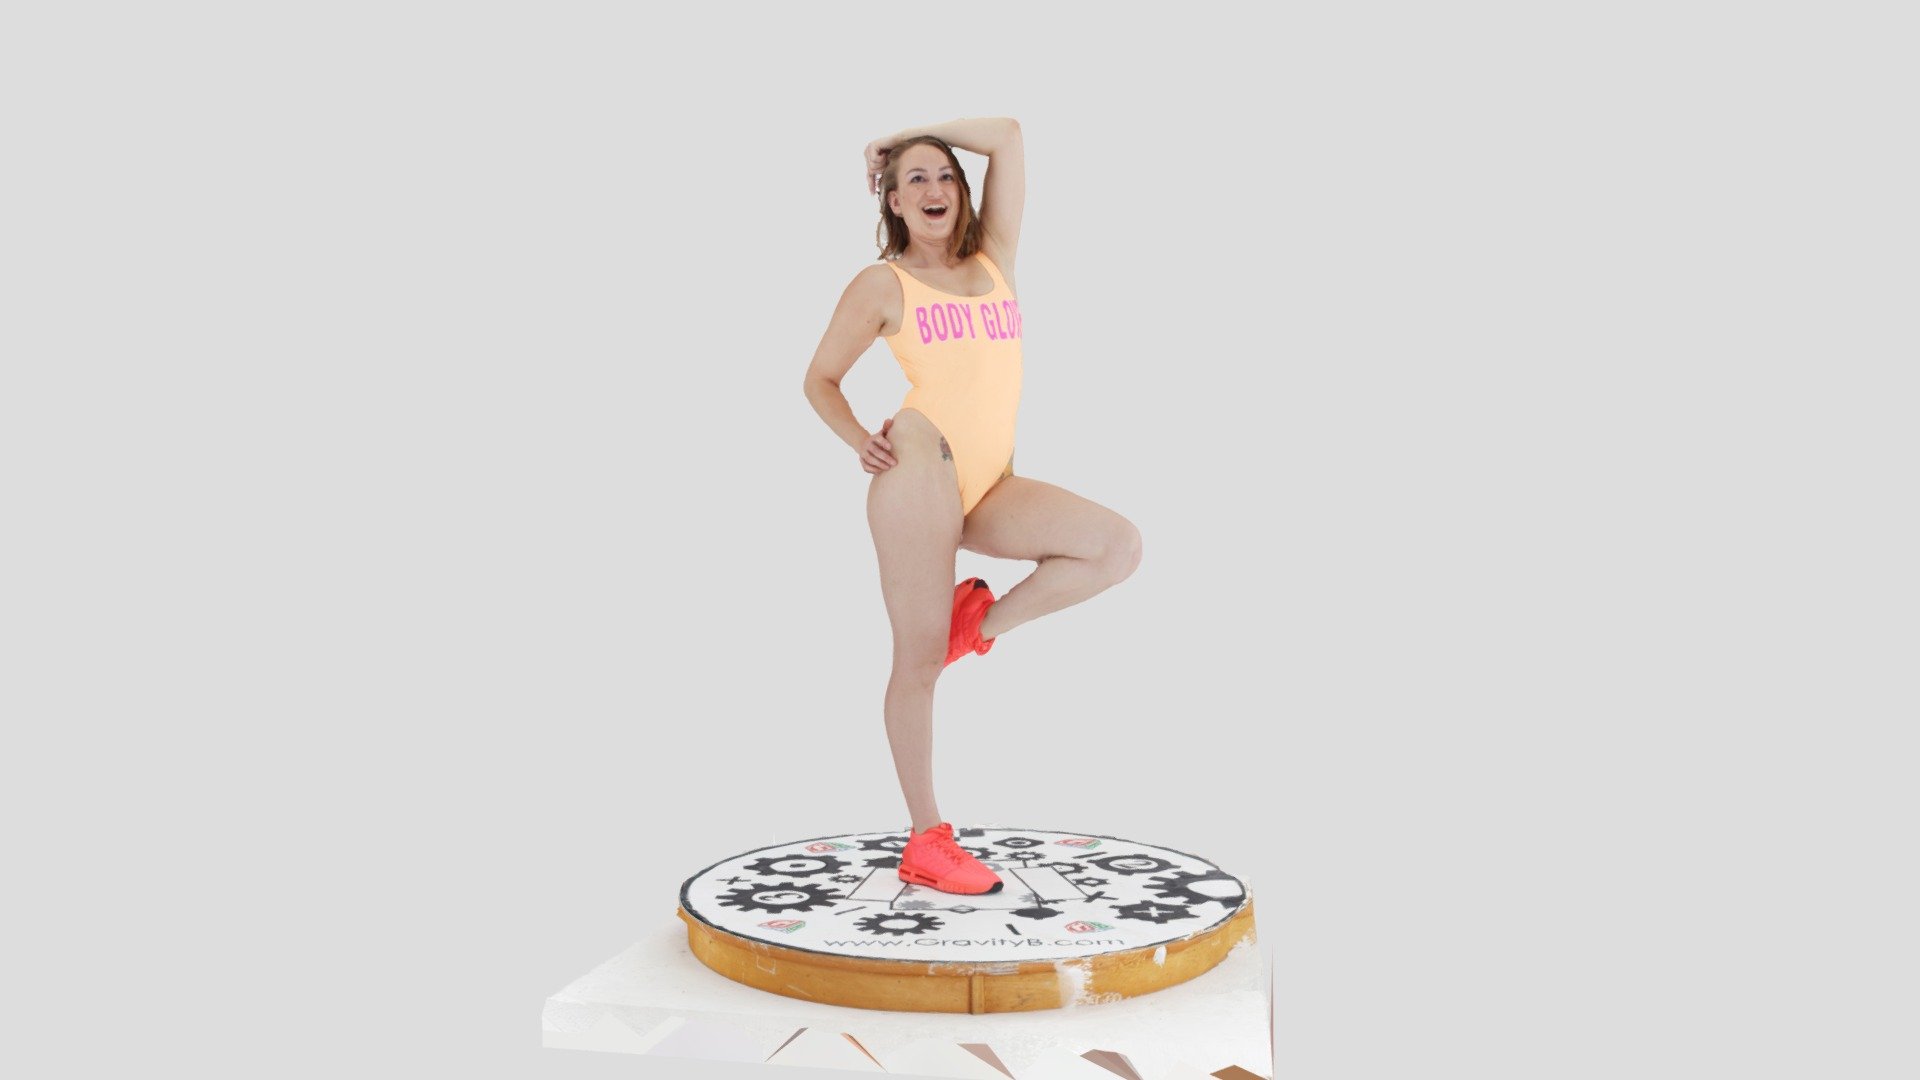 As part of a new fitness figure collection here's an unedited 3D capture of Alycia wearing her outstanding Body Glove suit and brilliant pink shoes 3d model